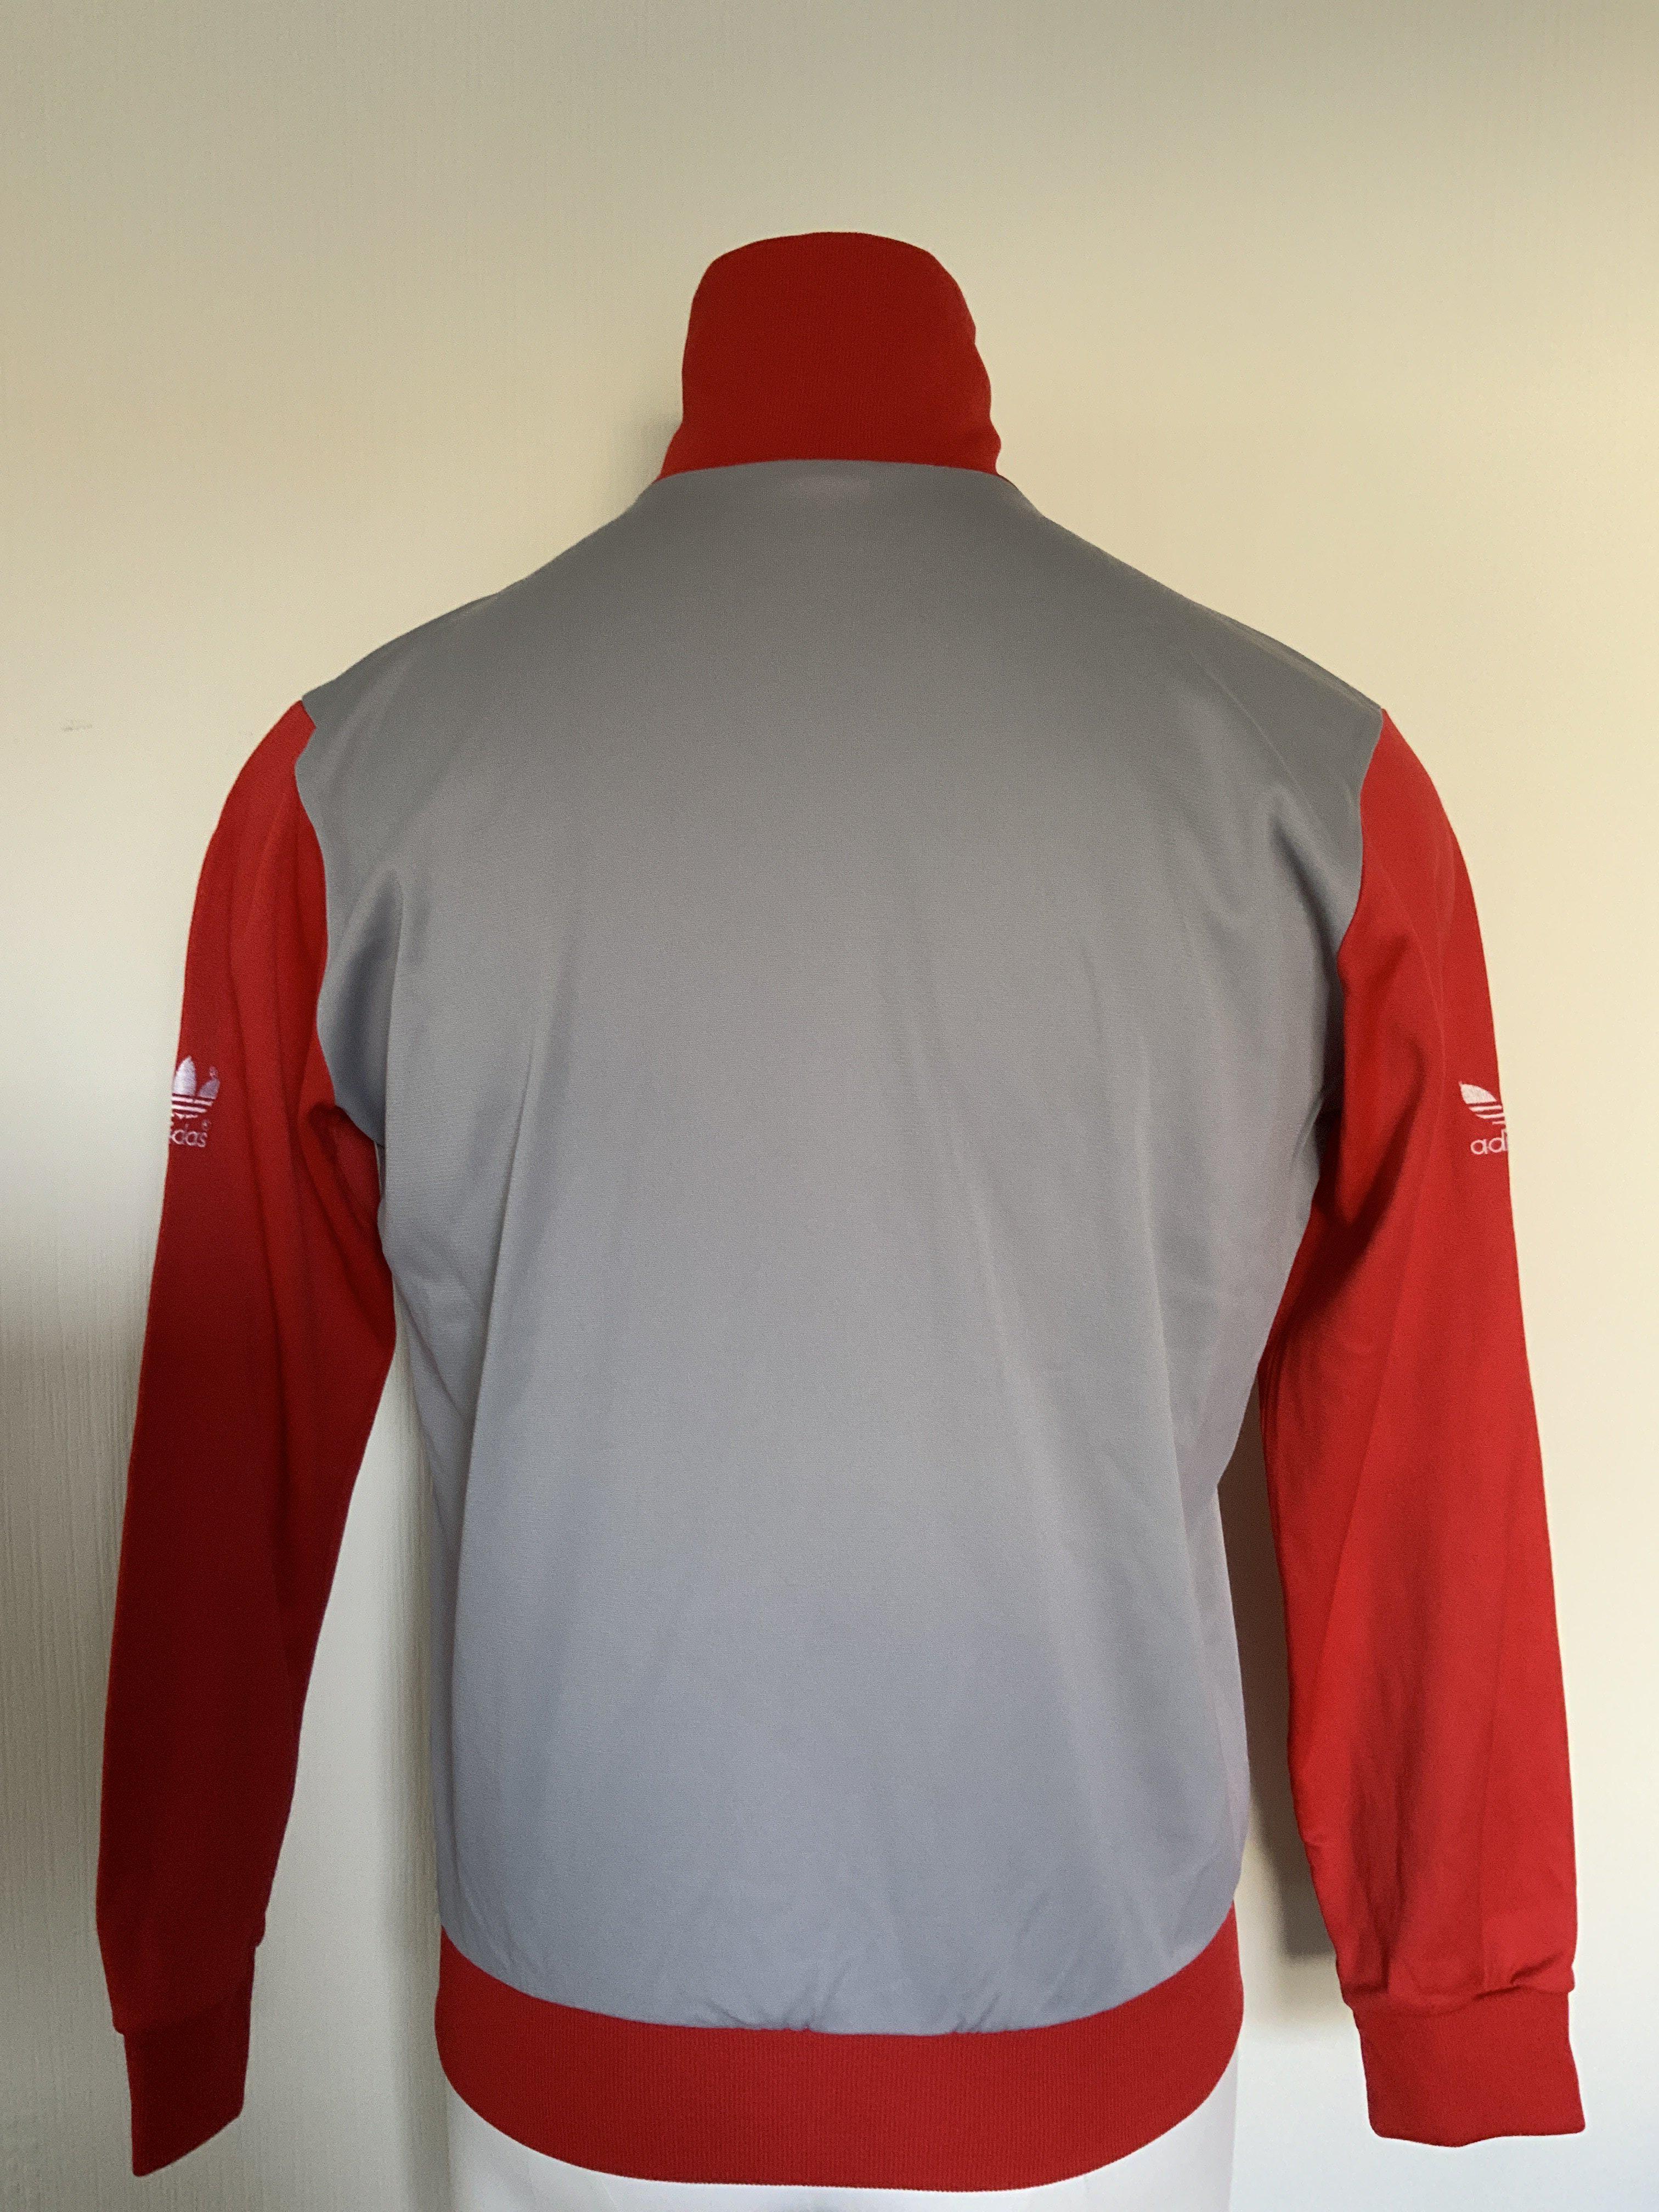 Liverpool 1987 Player Issue Football Tracksuit Top: Good condition original Adidas top in grey - Image 2 of 4